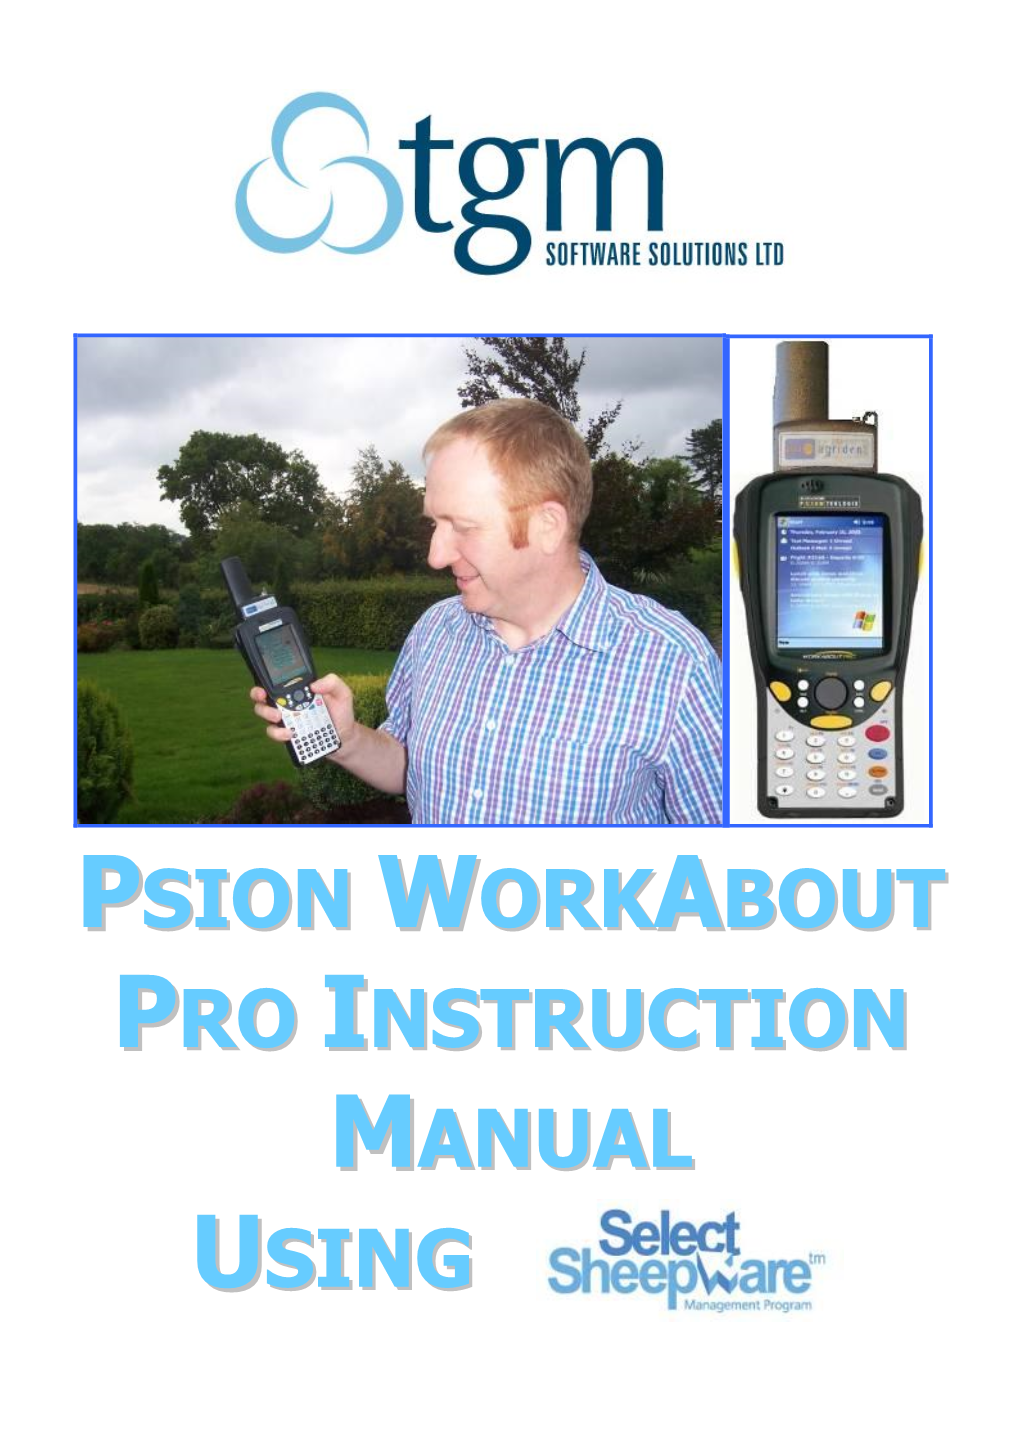 Psion Workabout Pro Instruction Manual Using Select Sheepware